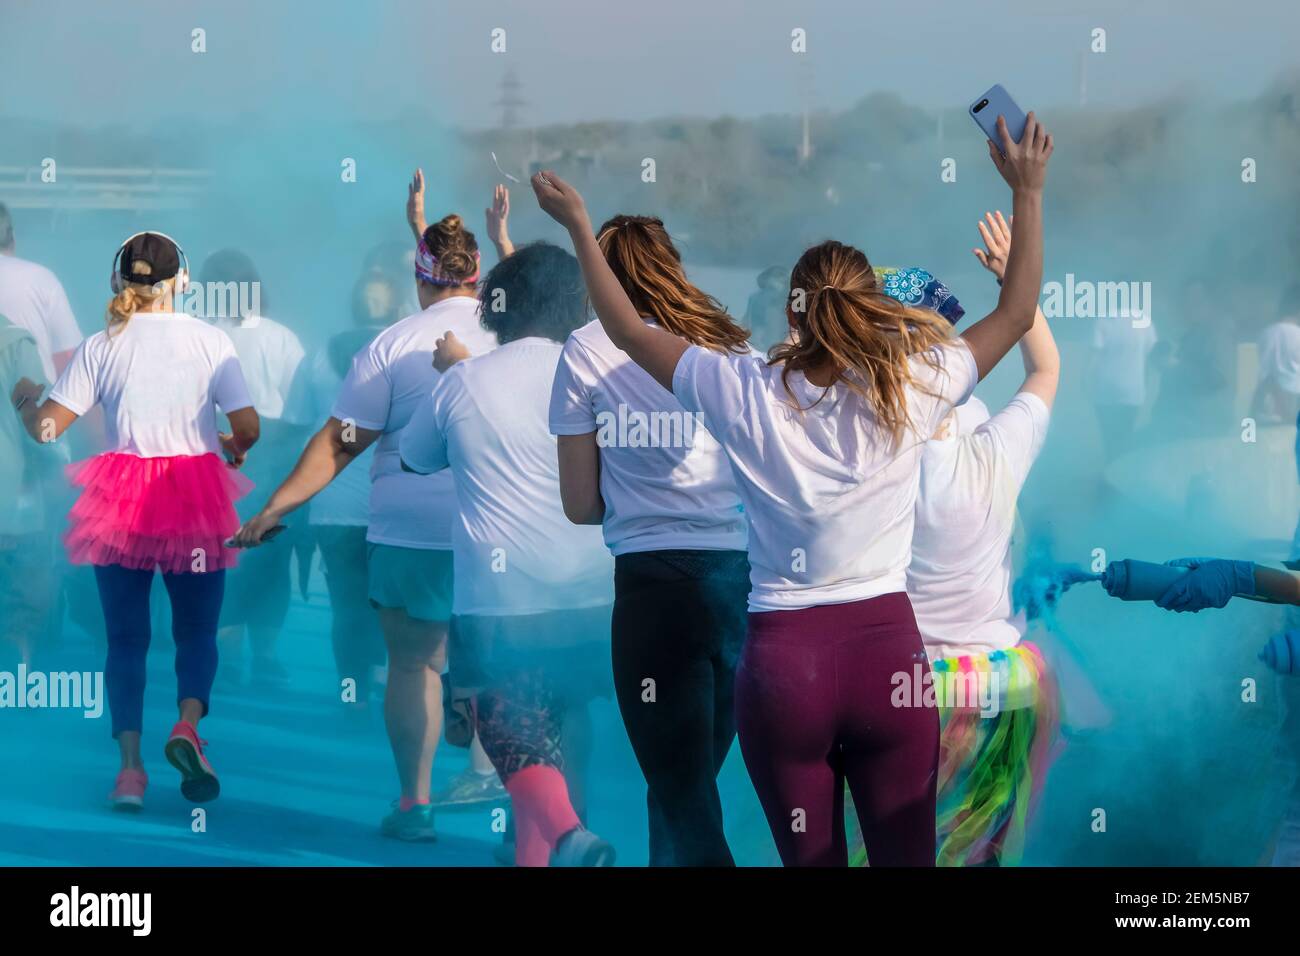 https://c8.alamy.com/comp/2EM5NB7/women-run-in-a-holi-color-run-race-with-arms-raised-with-blue-powder-swirling-around-them-unrecognizable-people-2EM5NB7.jpg